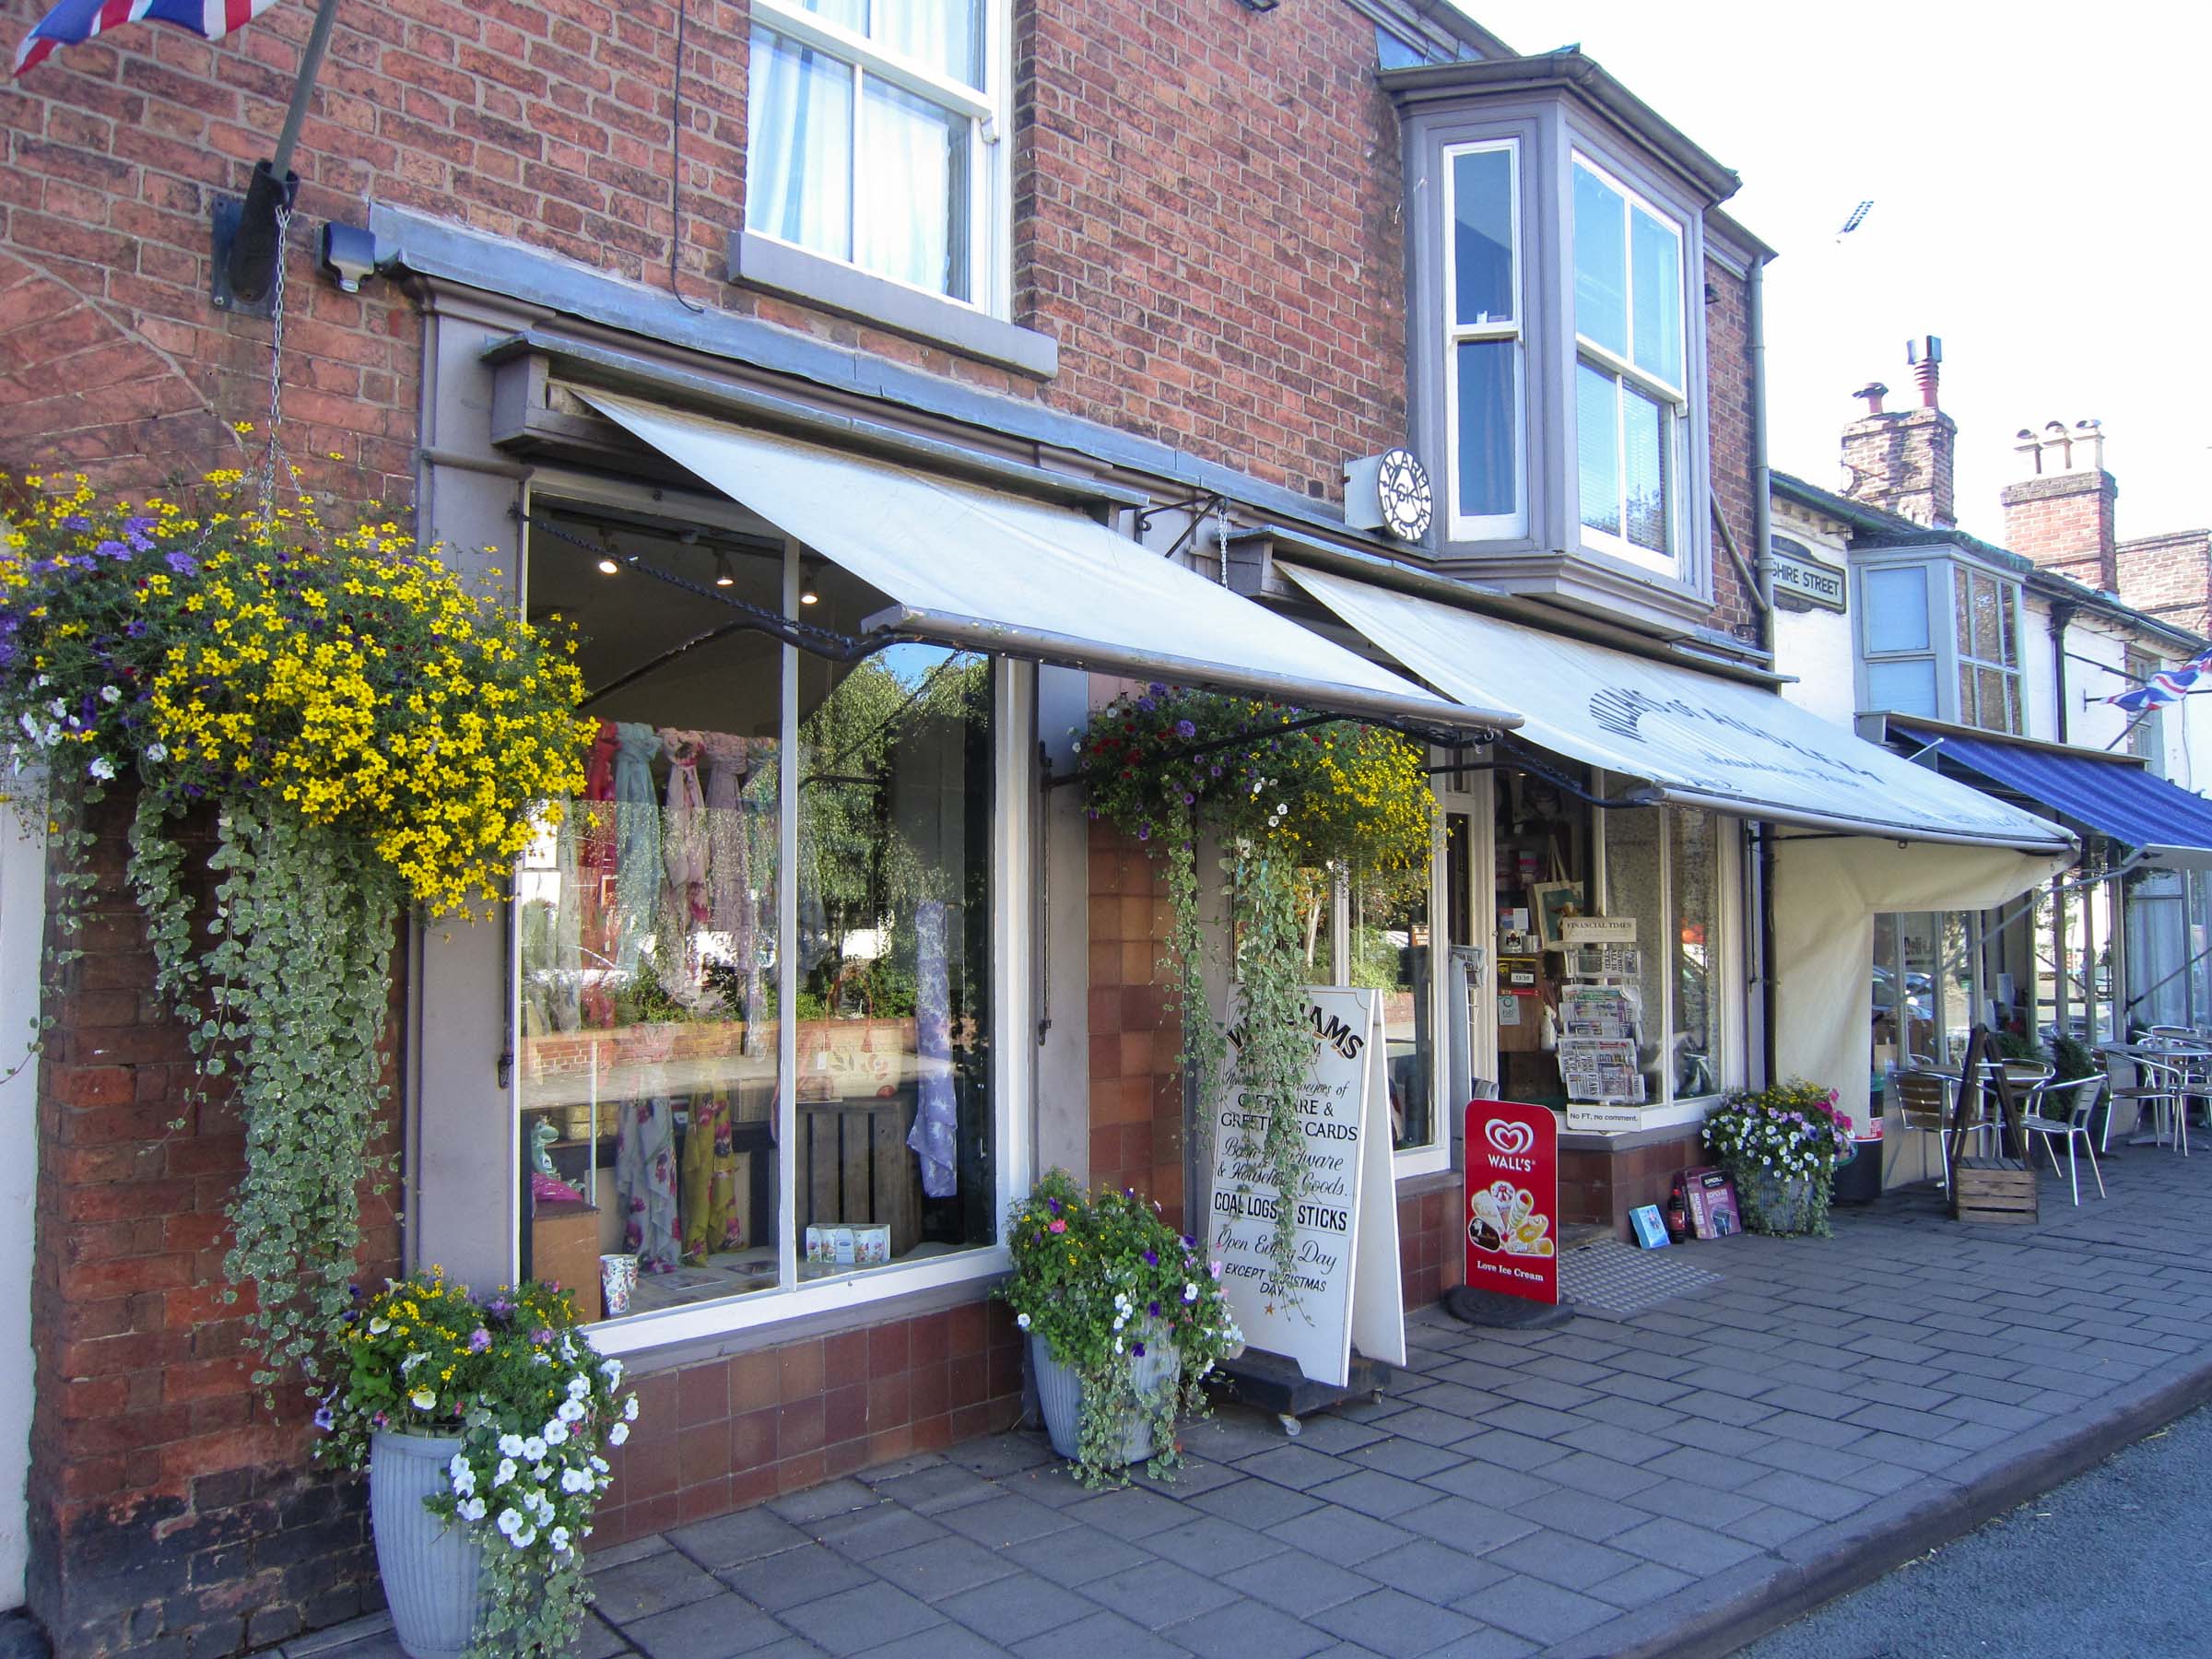 Williams of Audlem Mural - in bloom